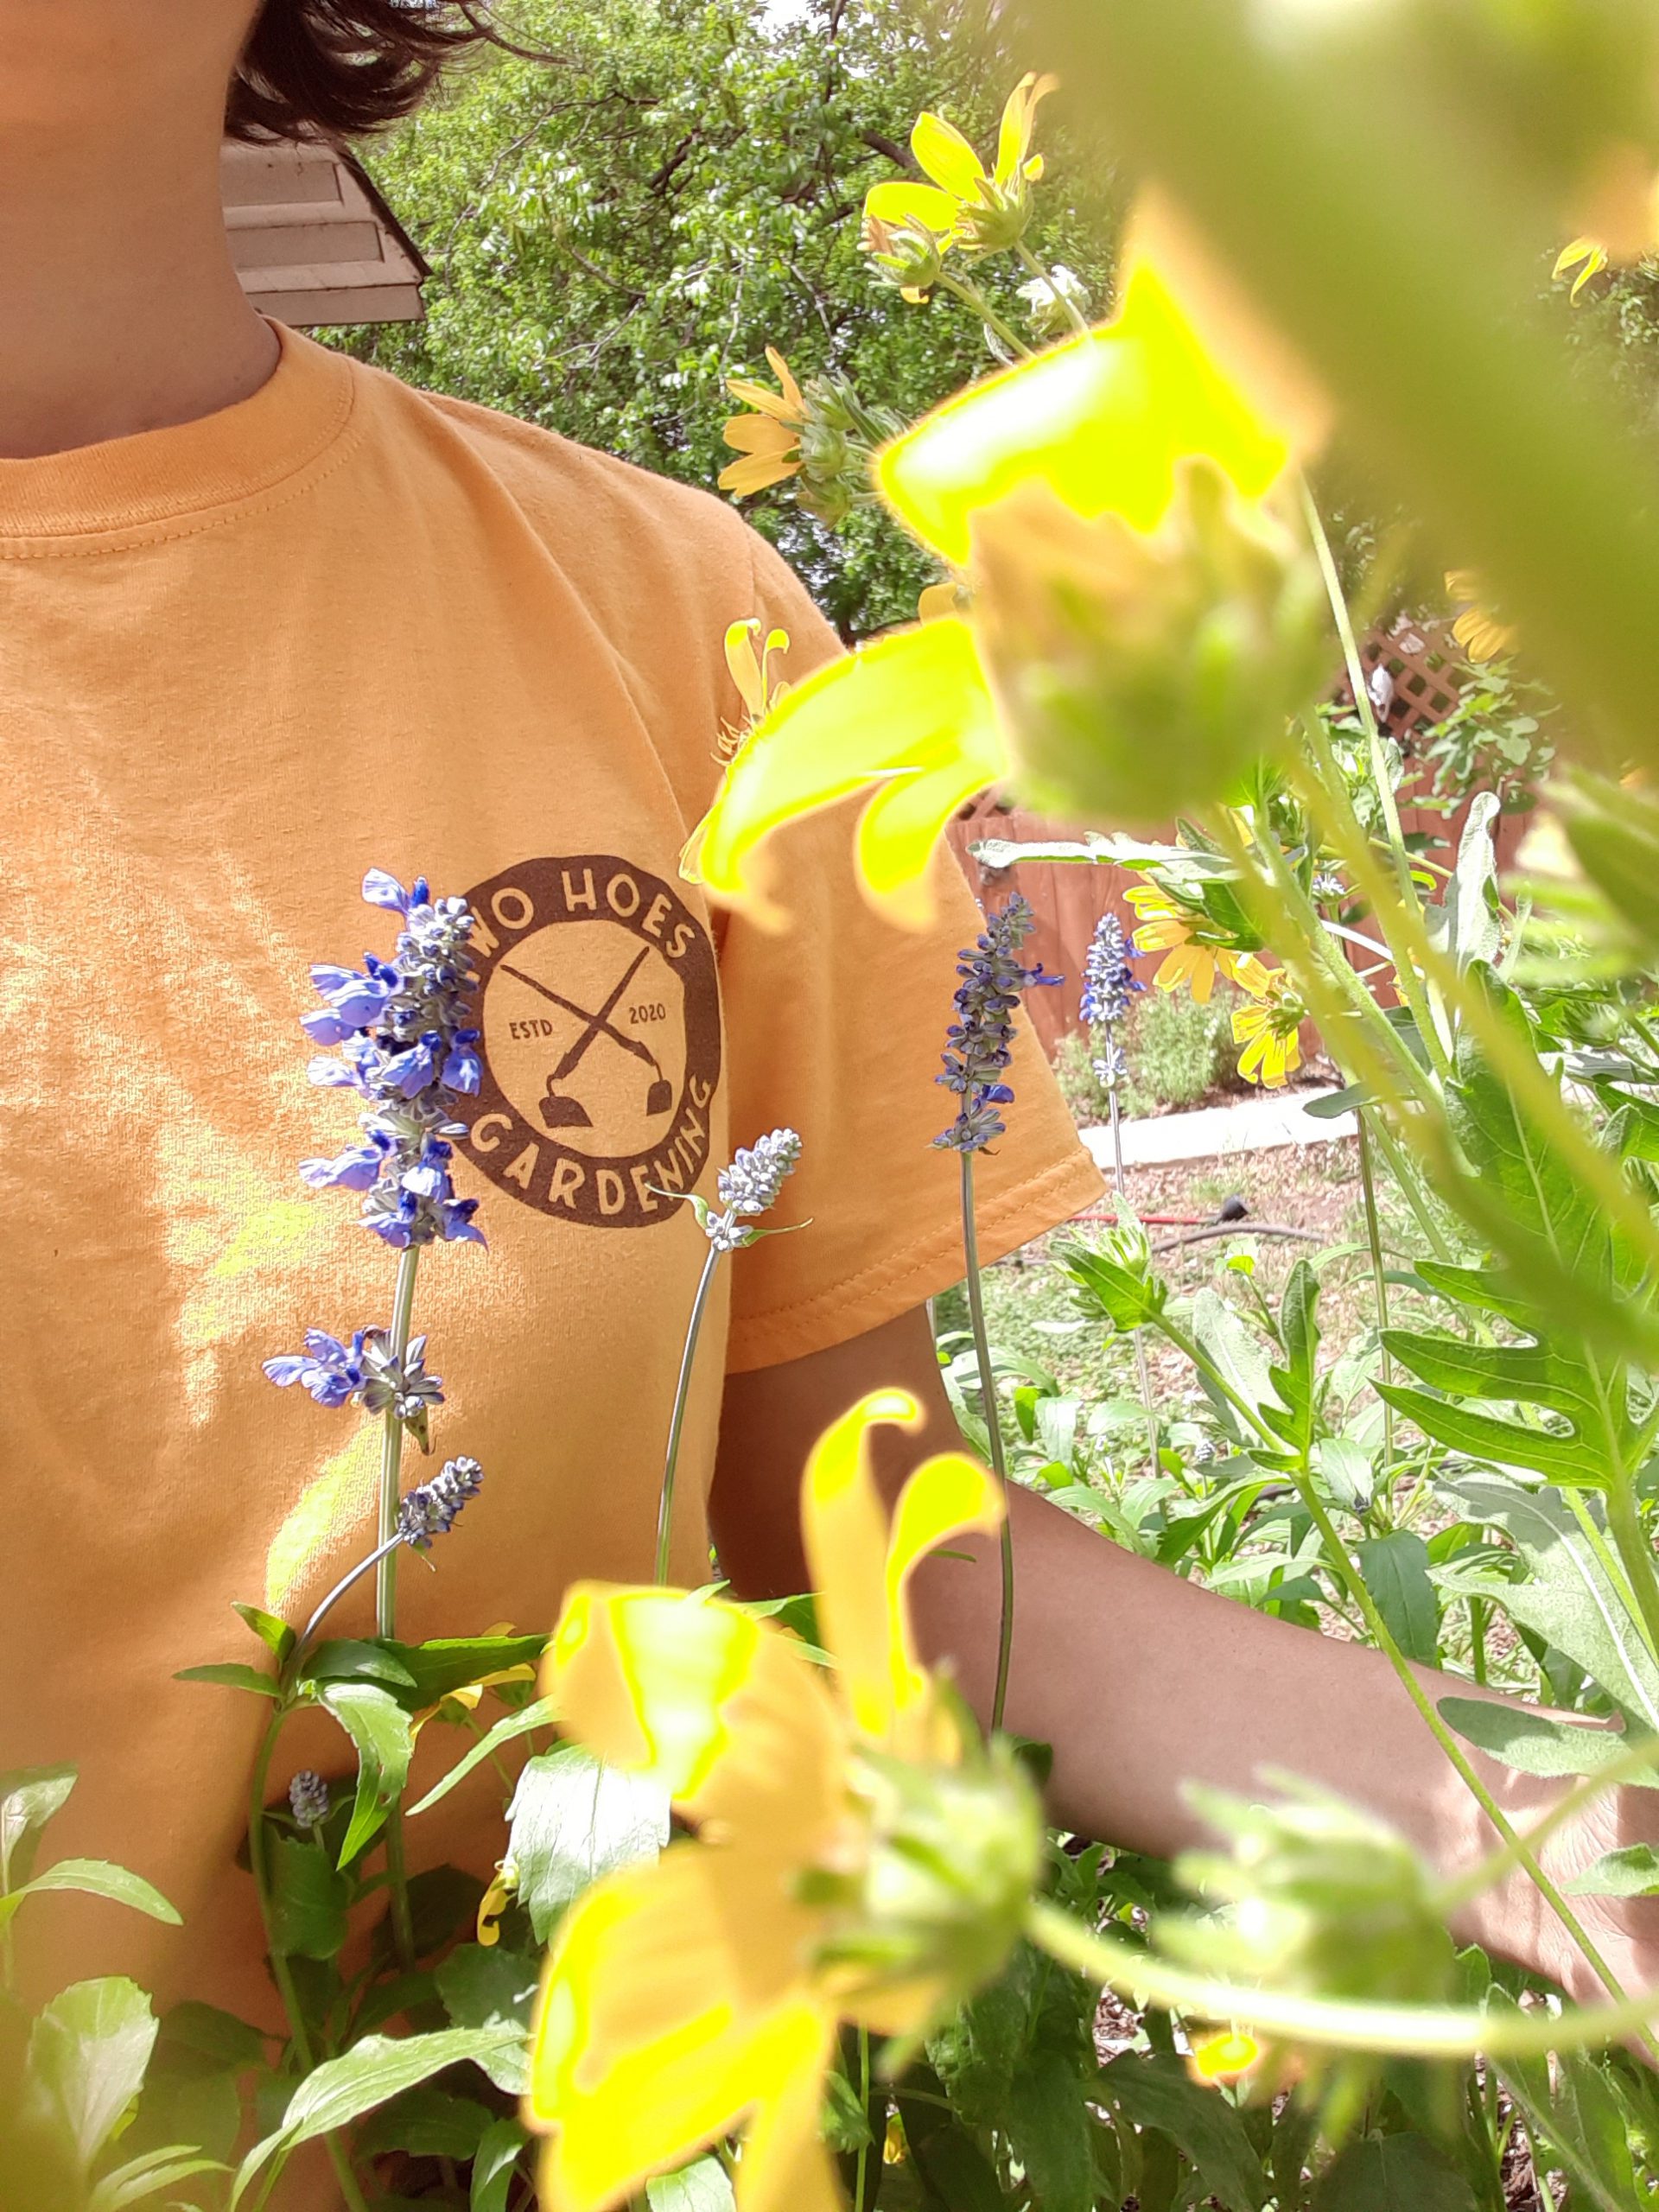 in frame, woman's torso wearing a yellow shirt with brown two hoes gardening logo positioned right behind lush wildflowers